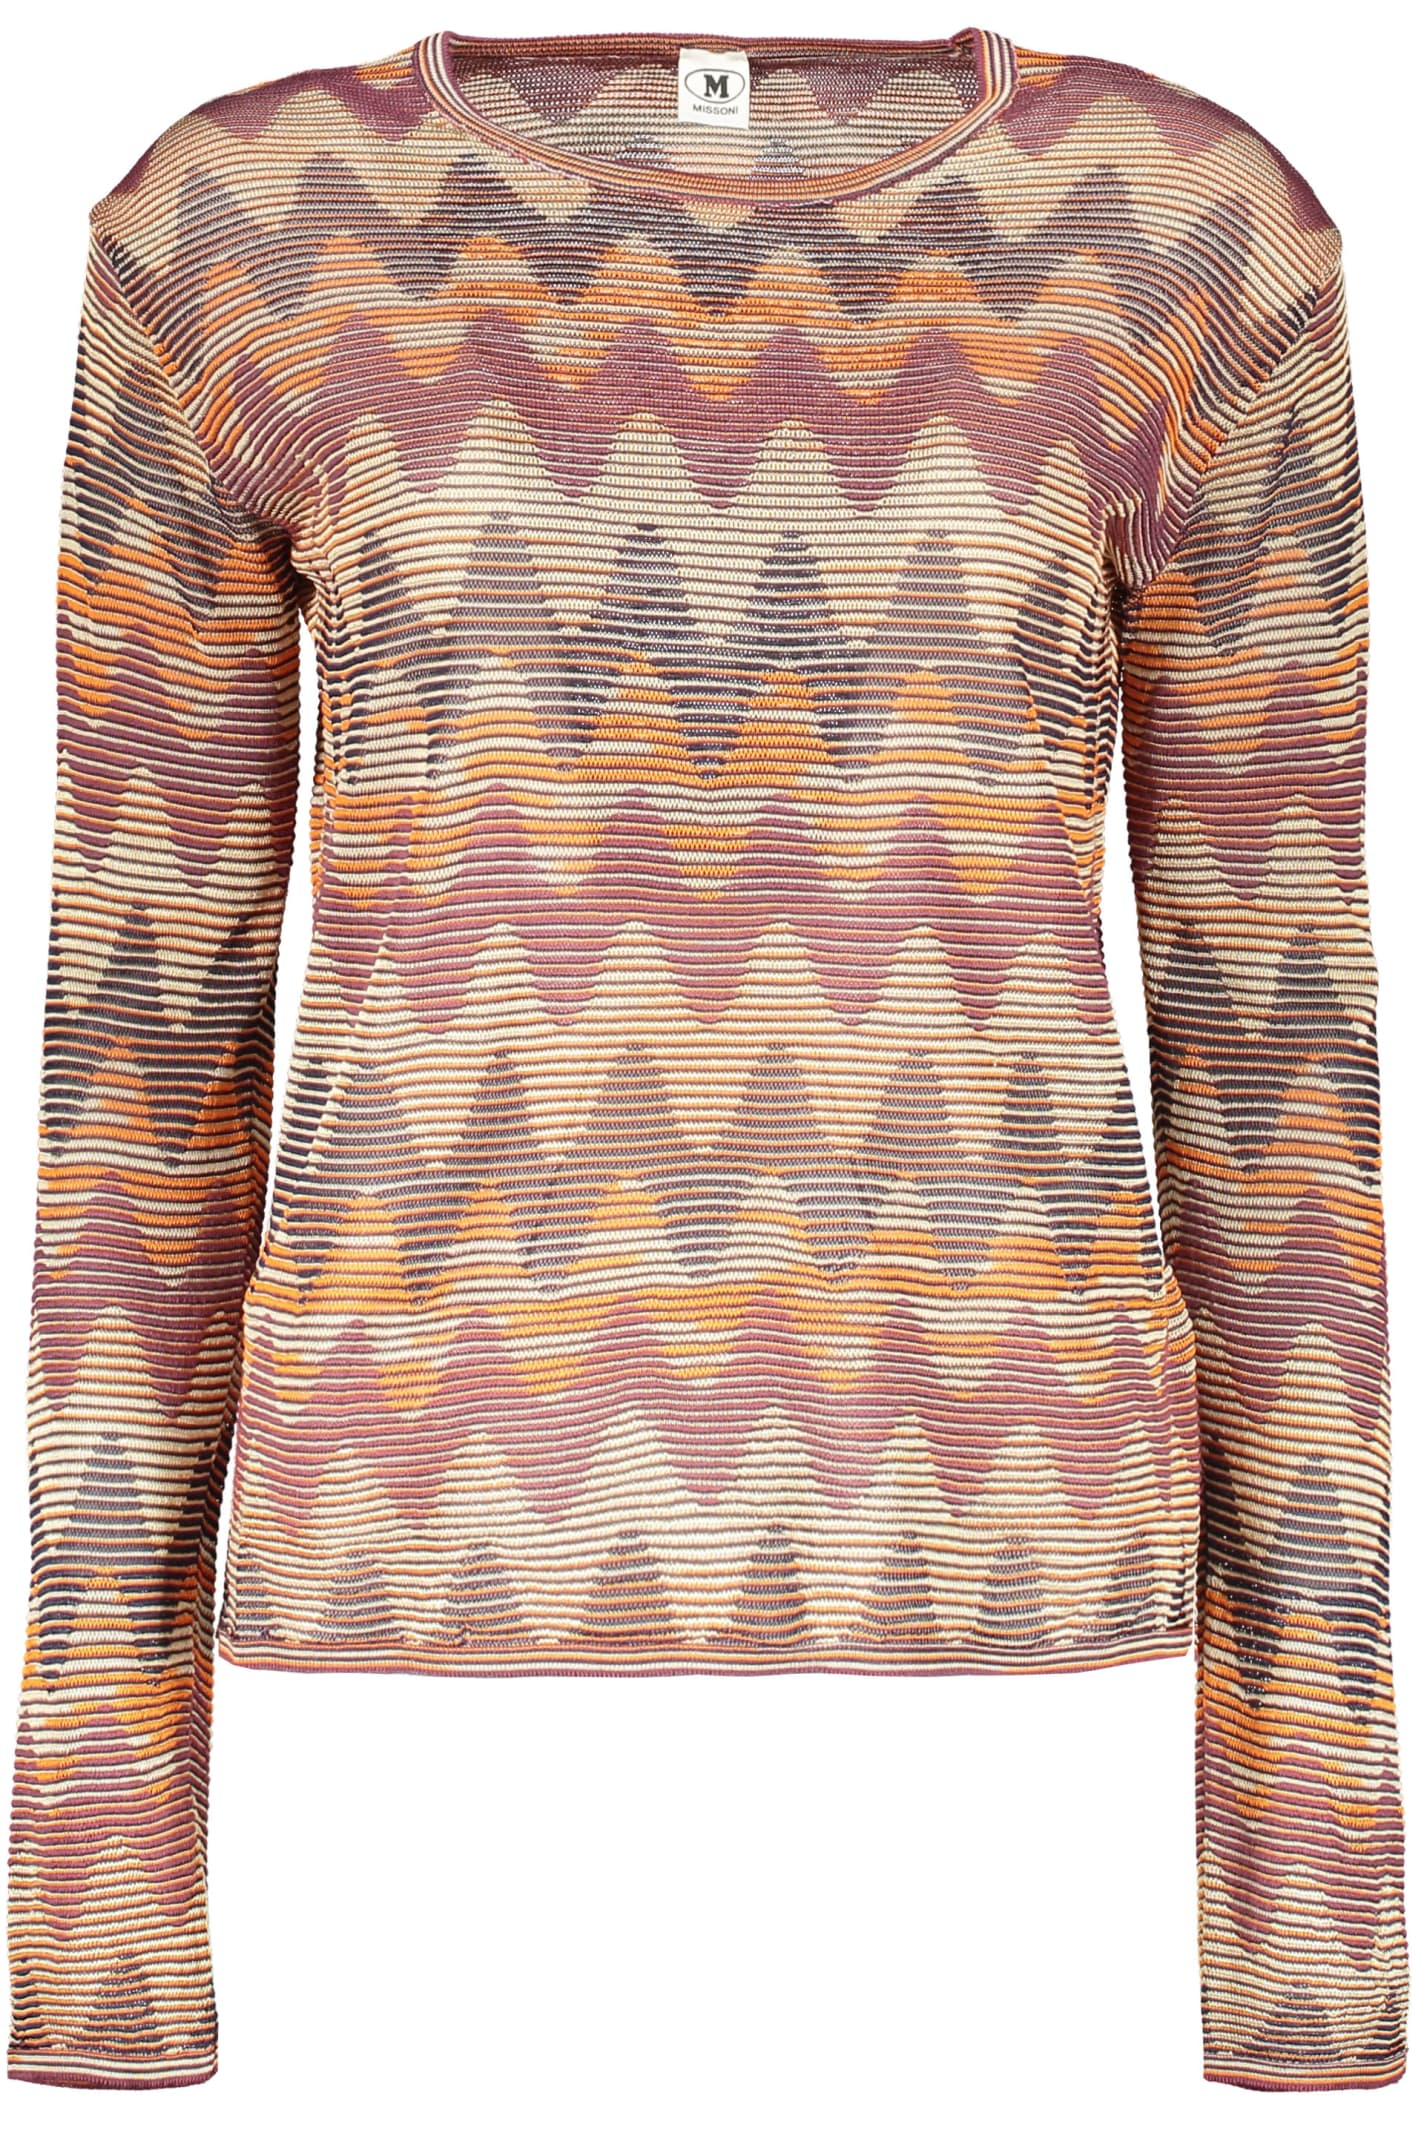 M Missoni Long Sleeve Crew-neck Sweater In Brown